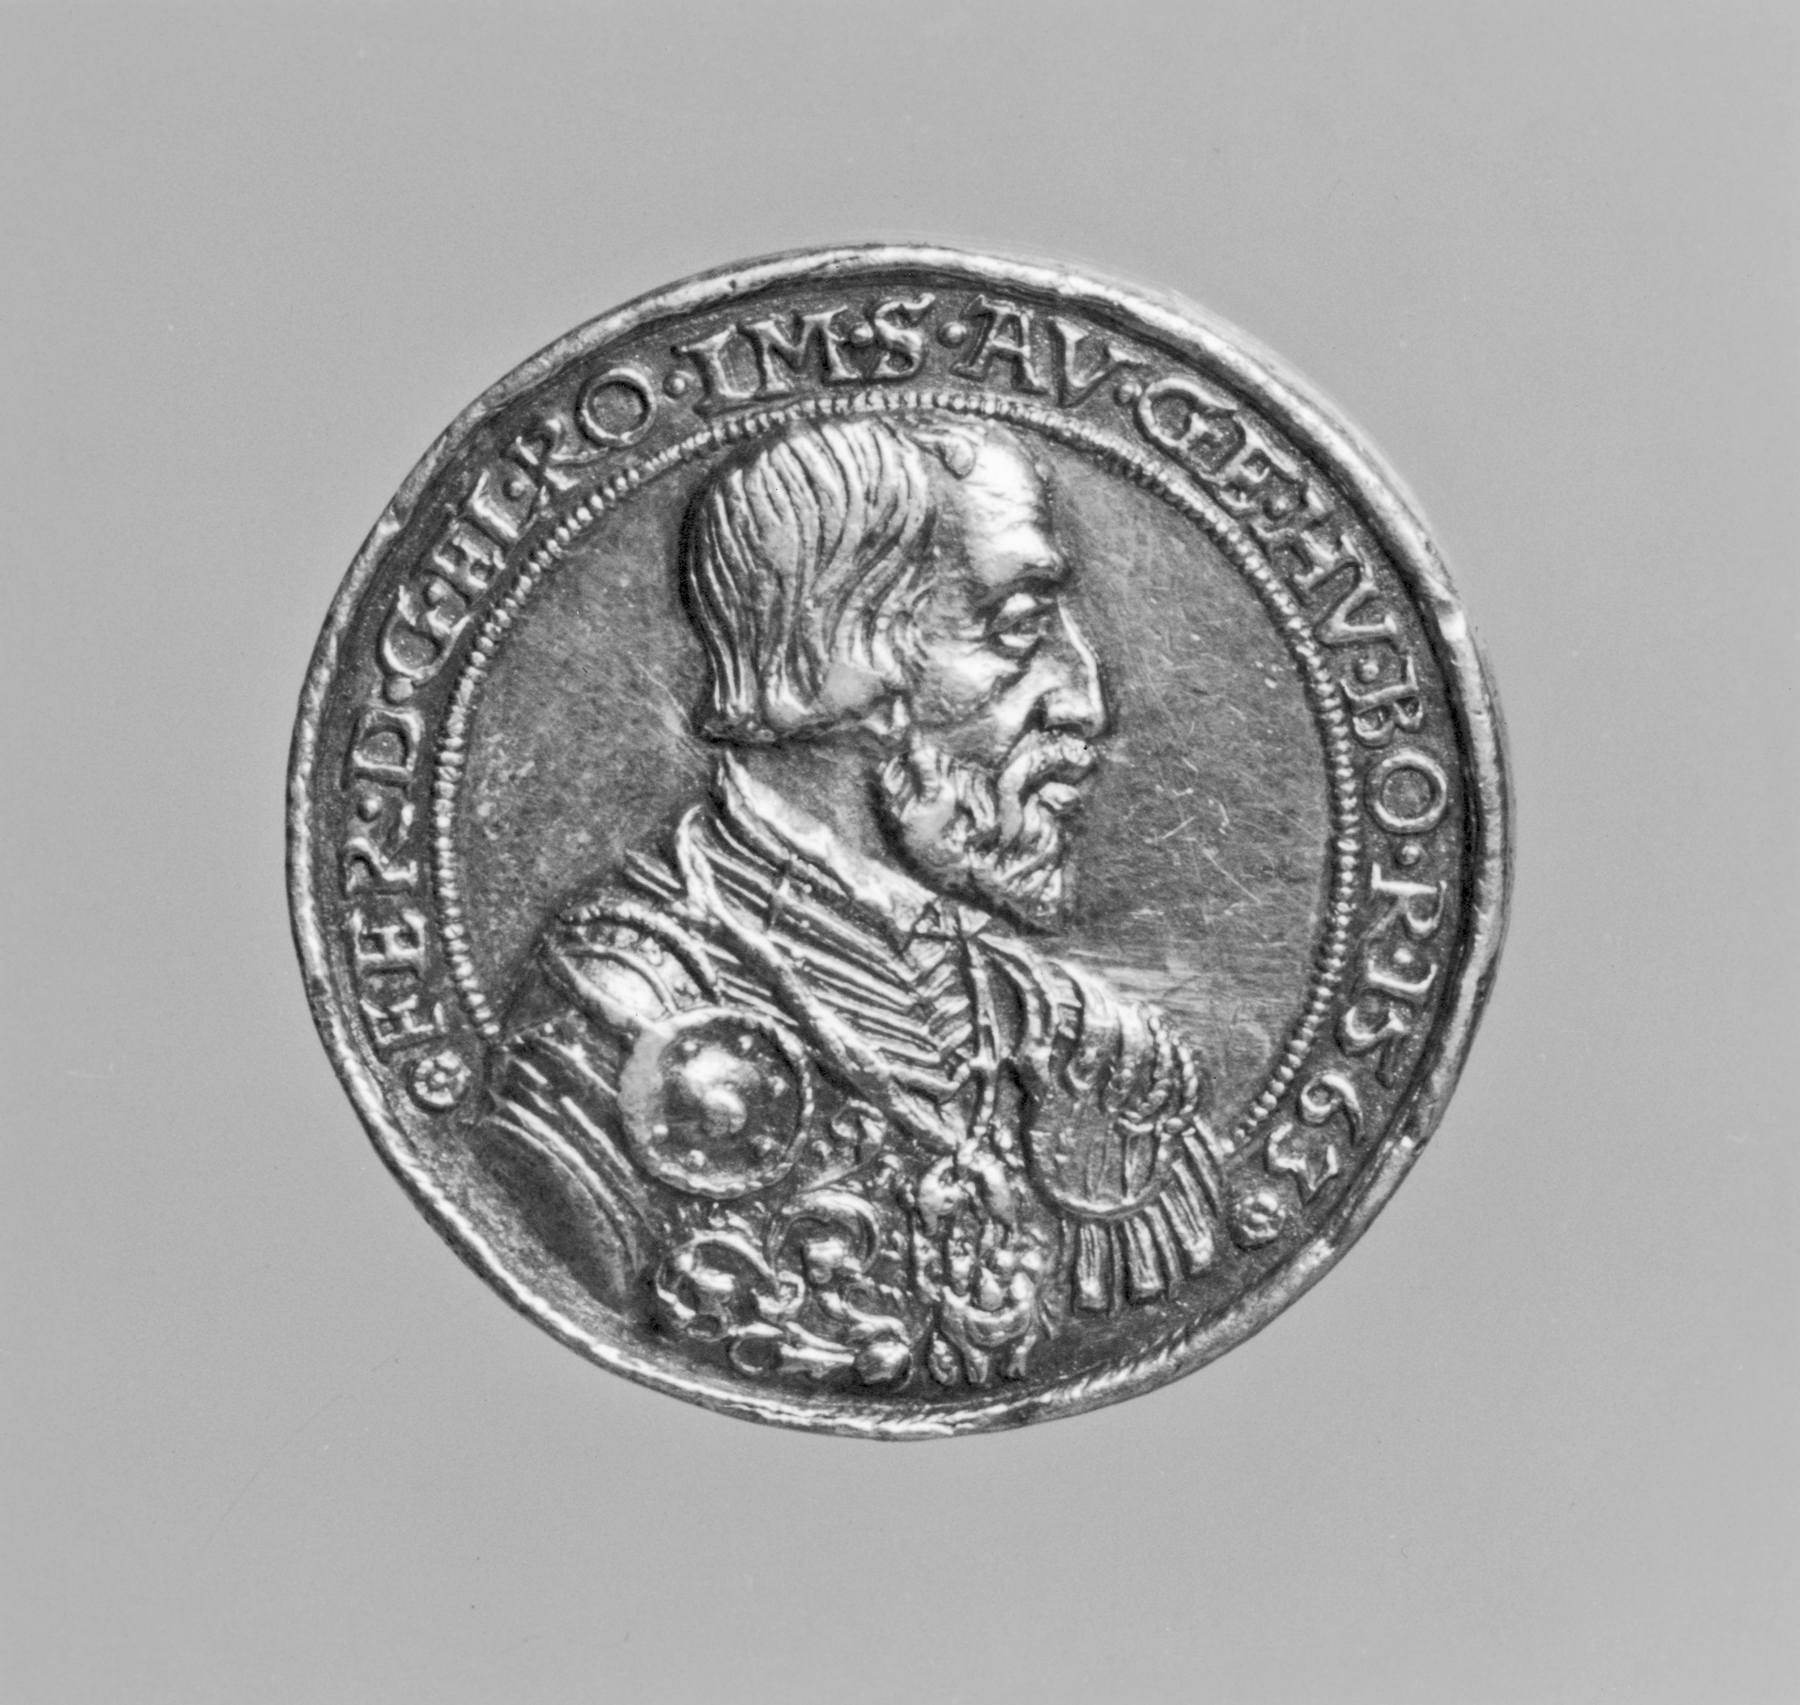 Image for Medal of Maximilian (1527-76) as King of Hungary and his Wife Maria of Spain